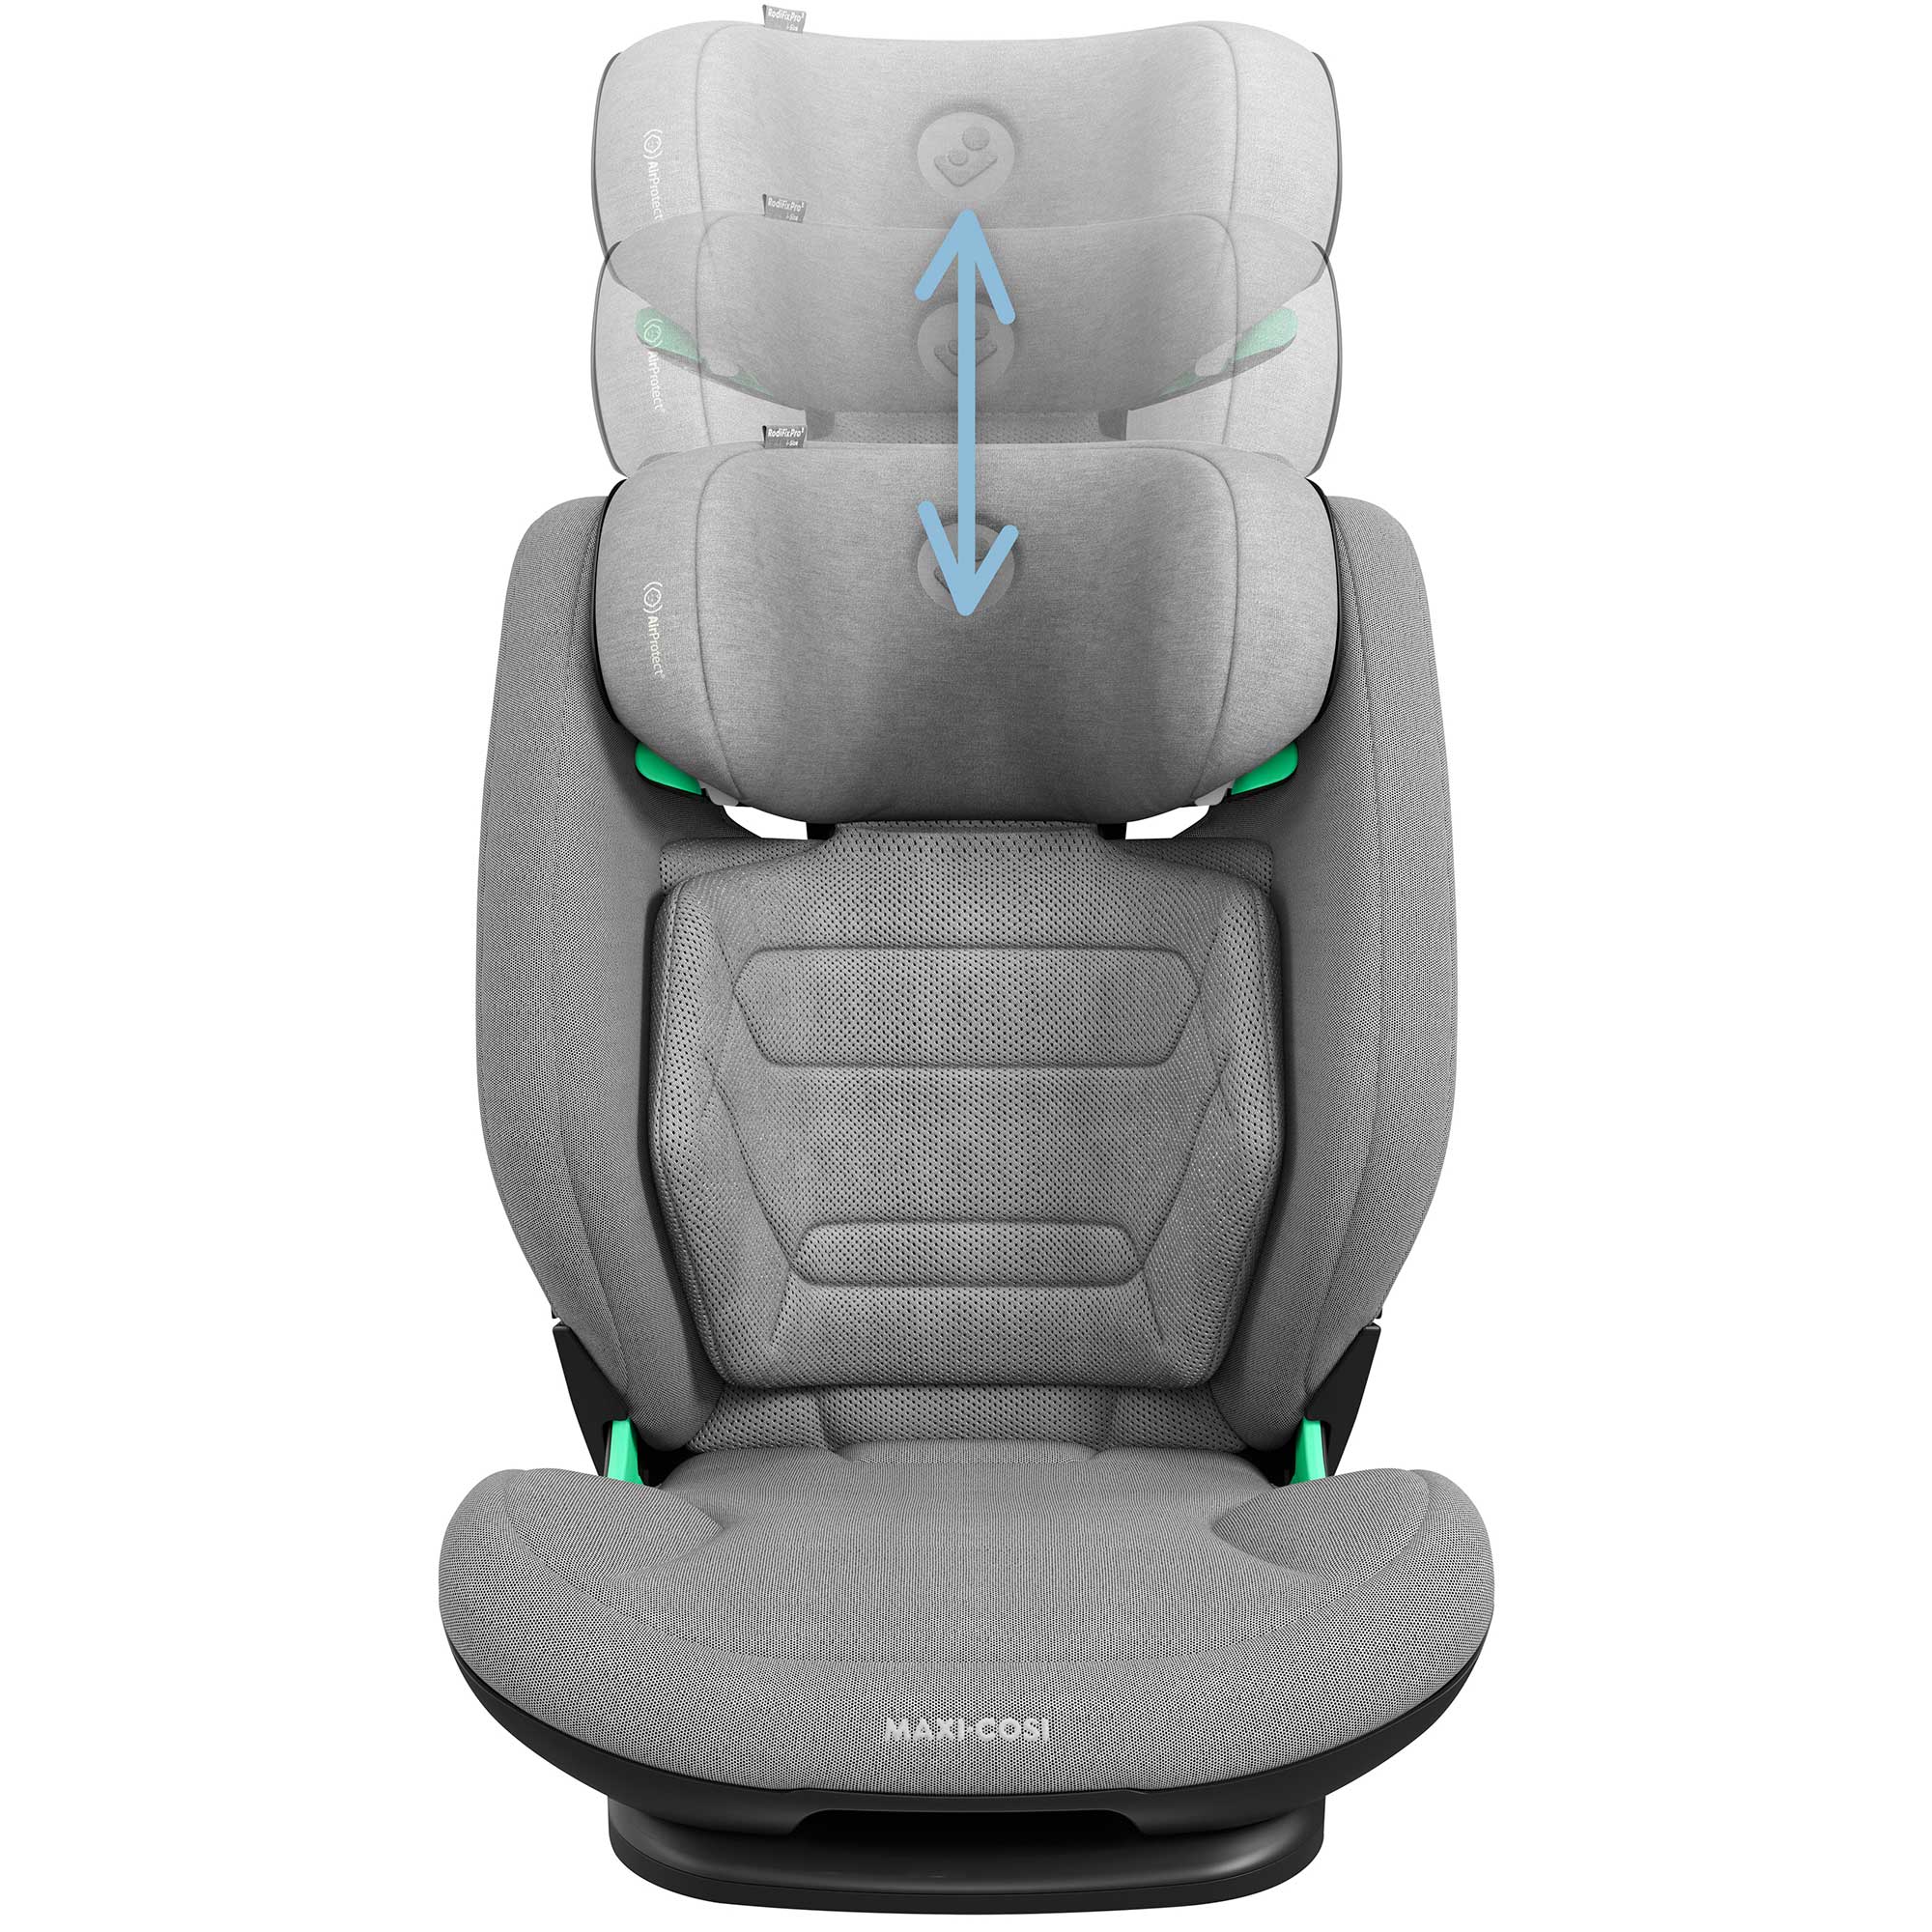 Maxi-Cosi Rodifix Pro 2 i-size Booster Seat in Authentic Grey Highback Booster Seats 8800510111 8712930183501